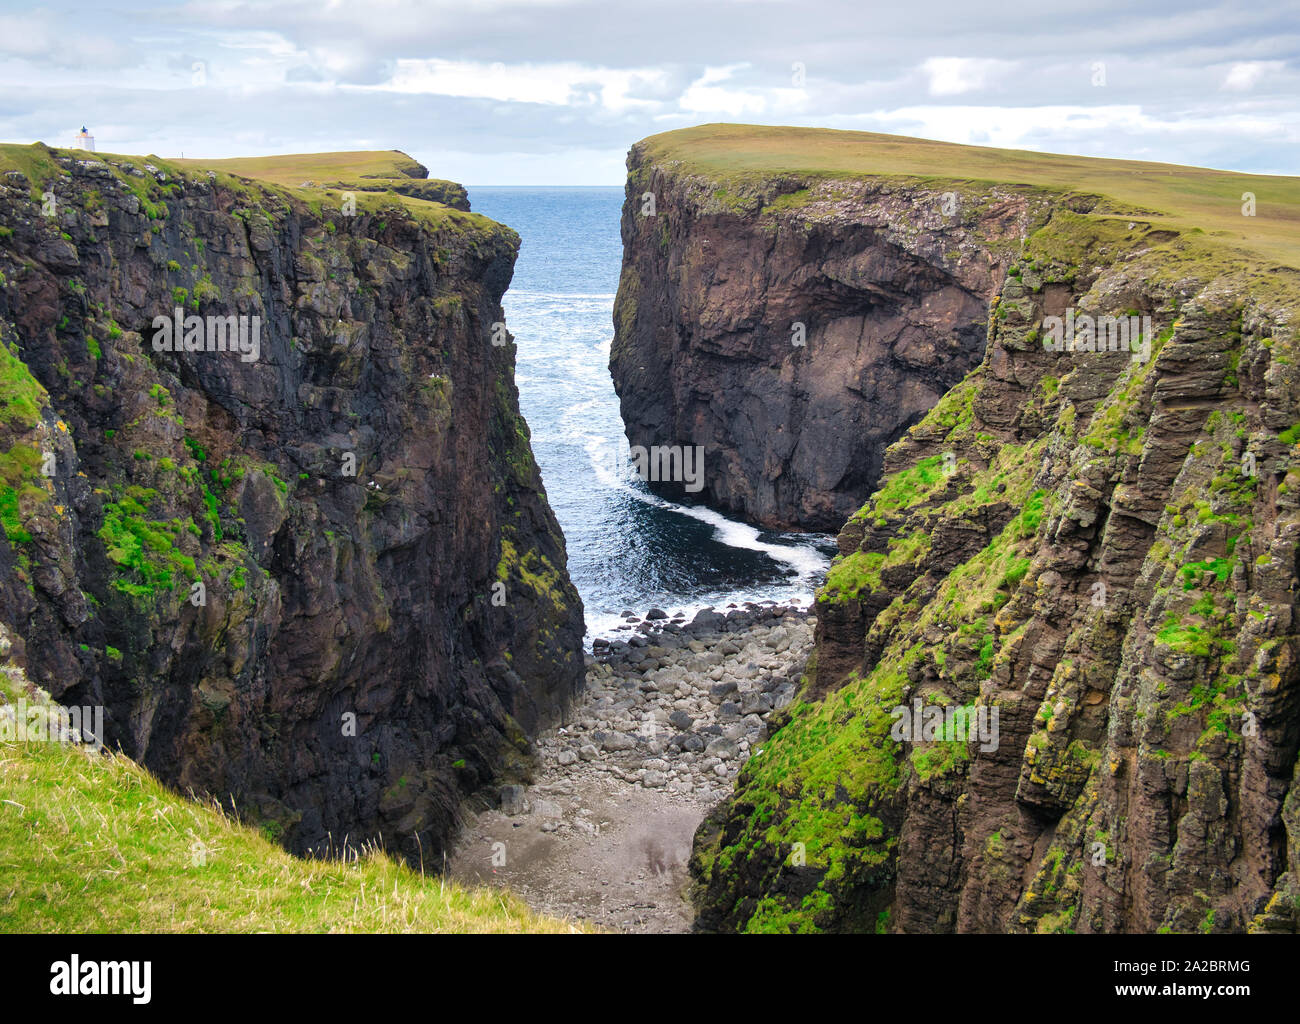 Calder's Geo - an inlet - on Eshaness, Shetland, UK - The rock is of the Eshaness Volcanic Formation - pyroclastic-breccia - igneous bedrock. Stock Photo